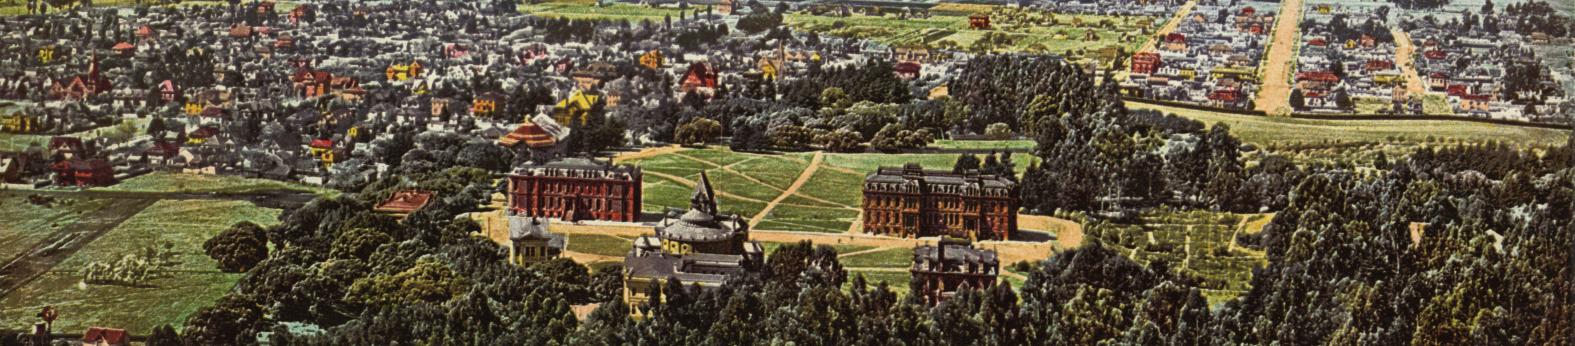 UC Berkeley Campus between 1898 and 1905 (photo courtesy of the Library of Congress)